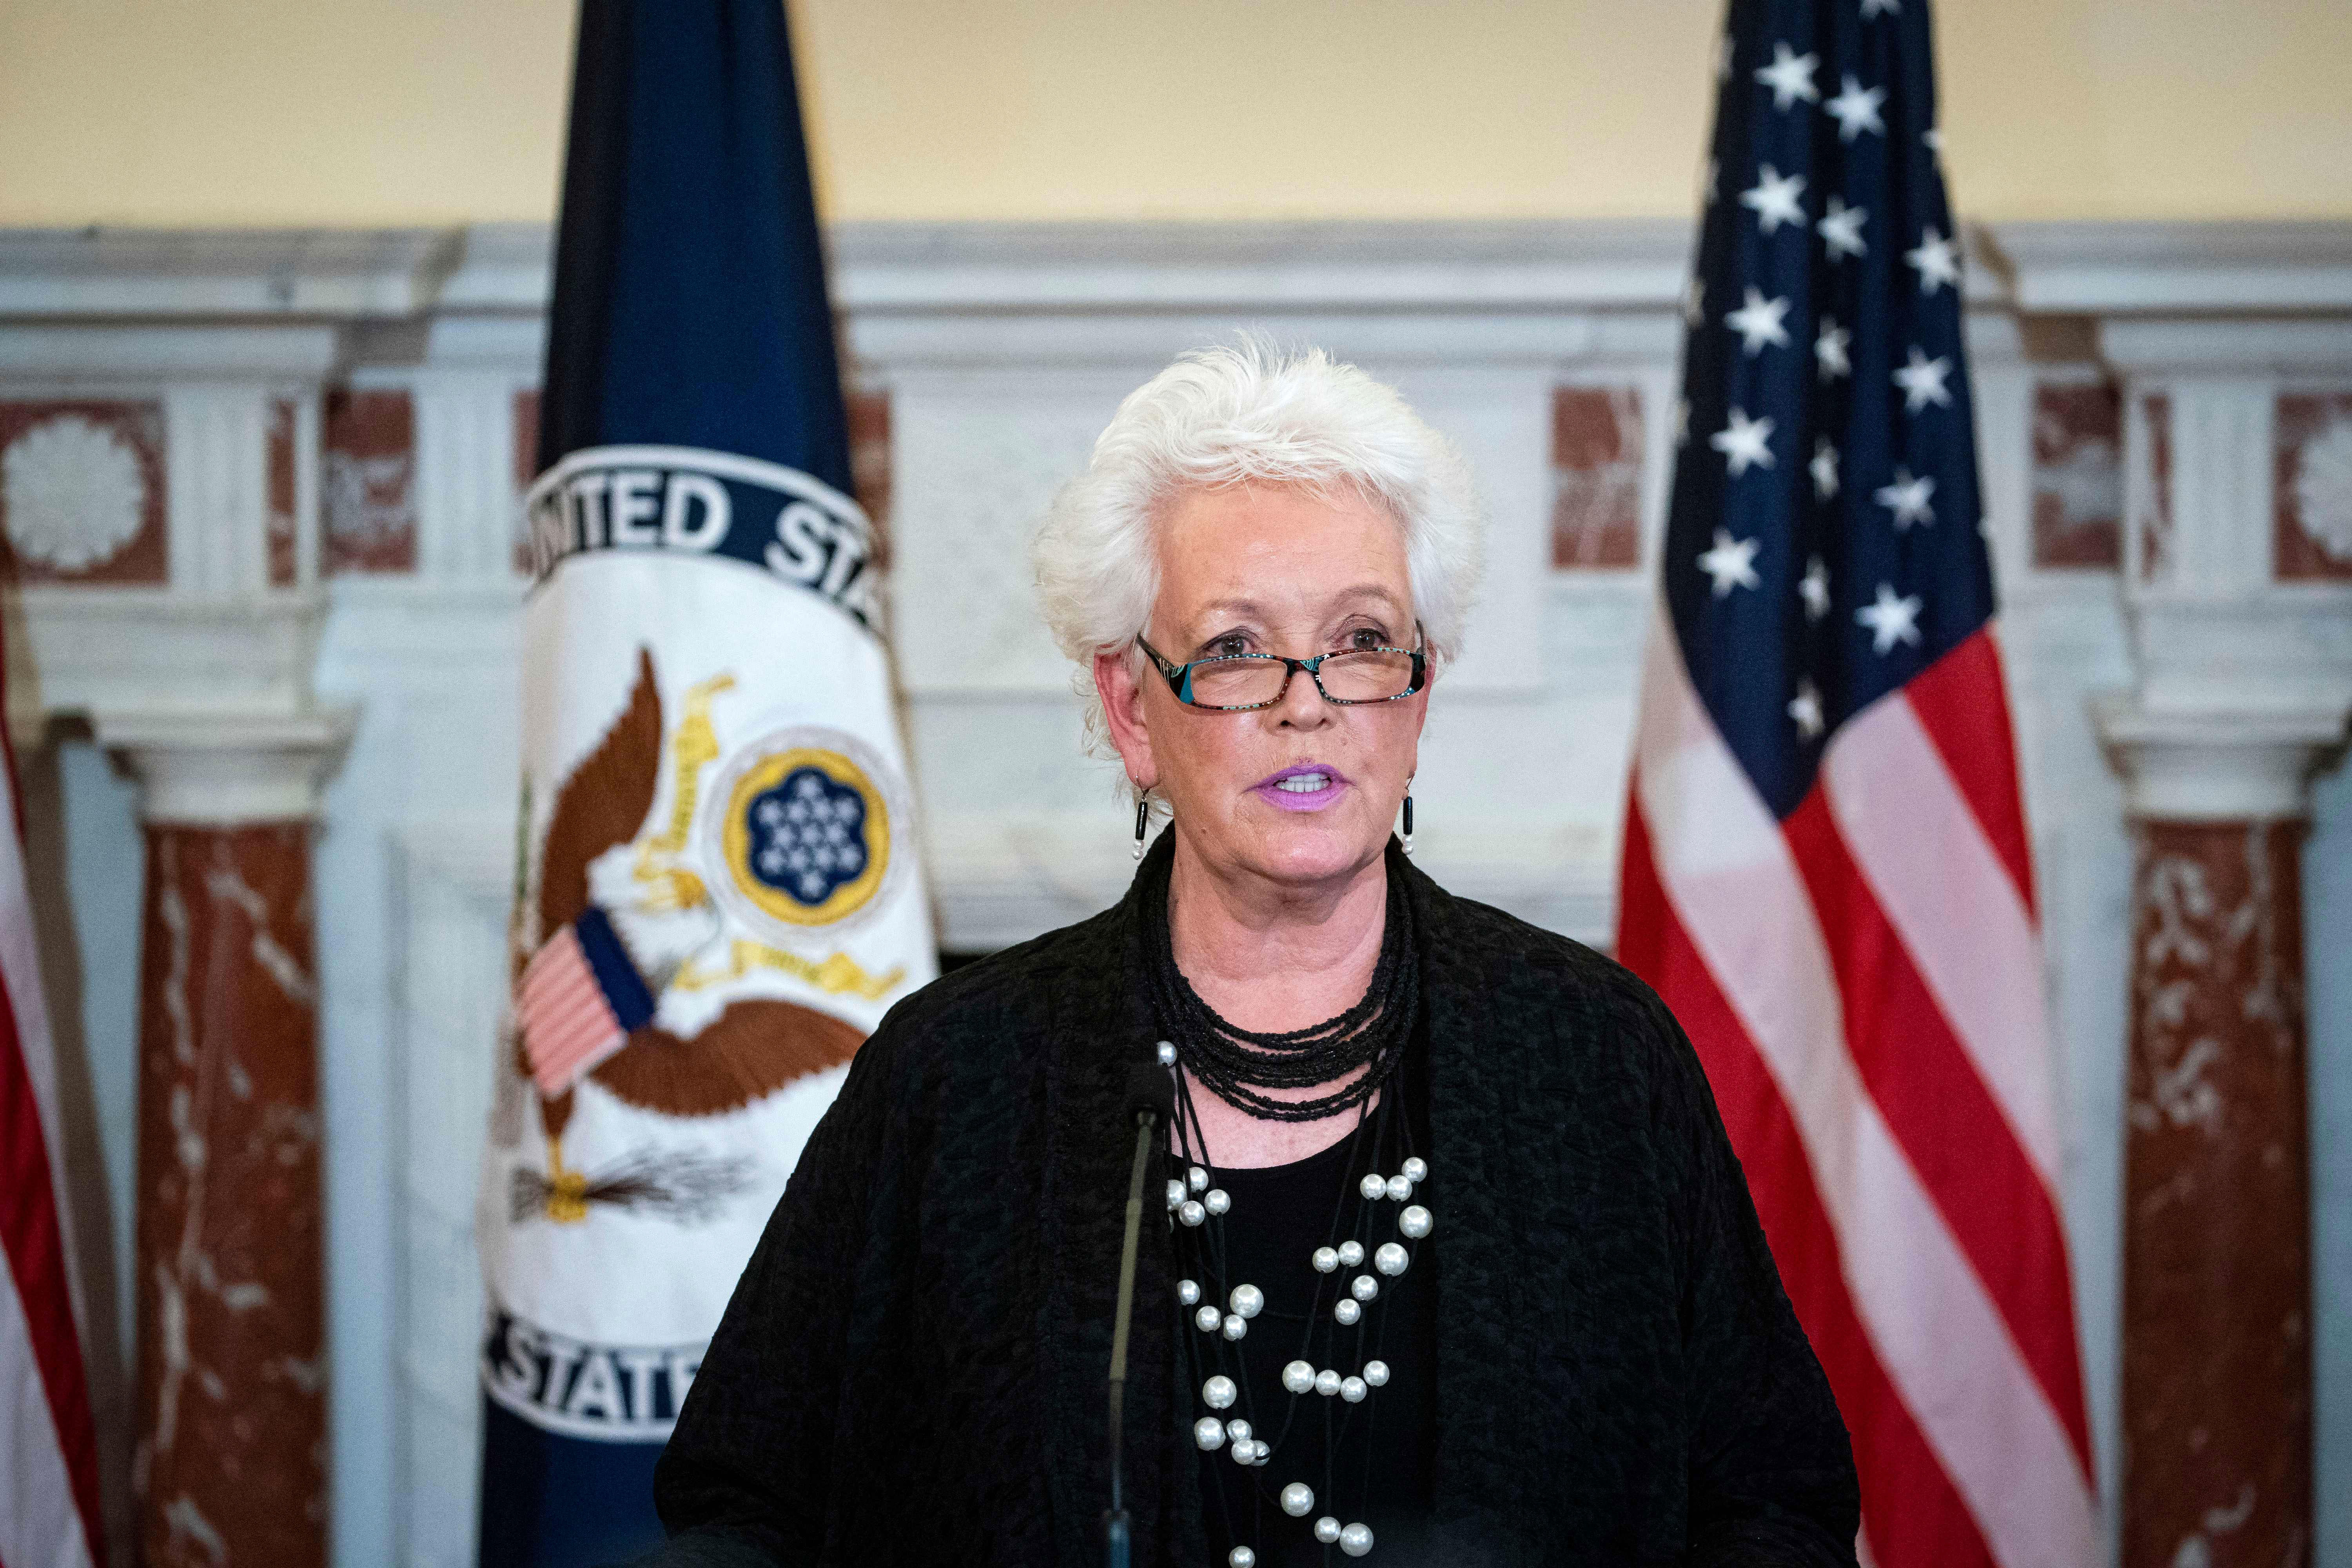 Gayle Smith speaks in Washington, DC, on April 5, after US Secretary of State Antony Blinken announced her appointment as the State Department's coordinator for global Covid-19 response and health security.